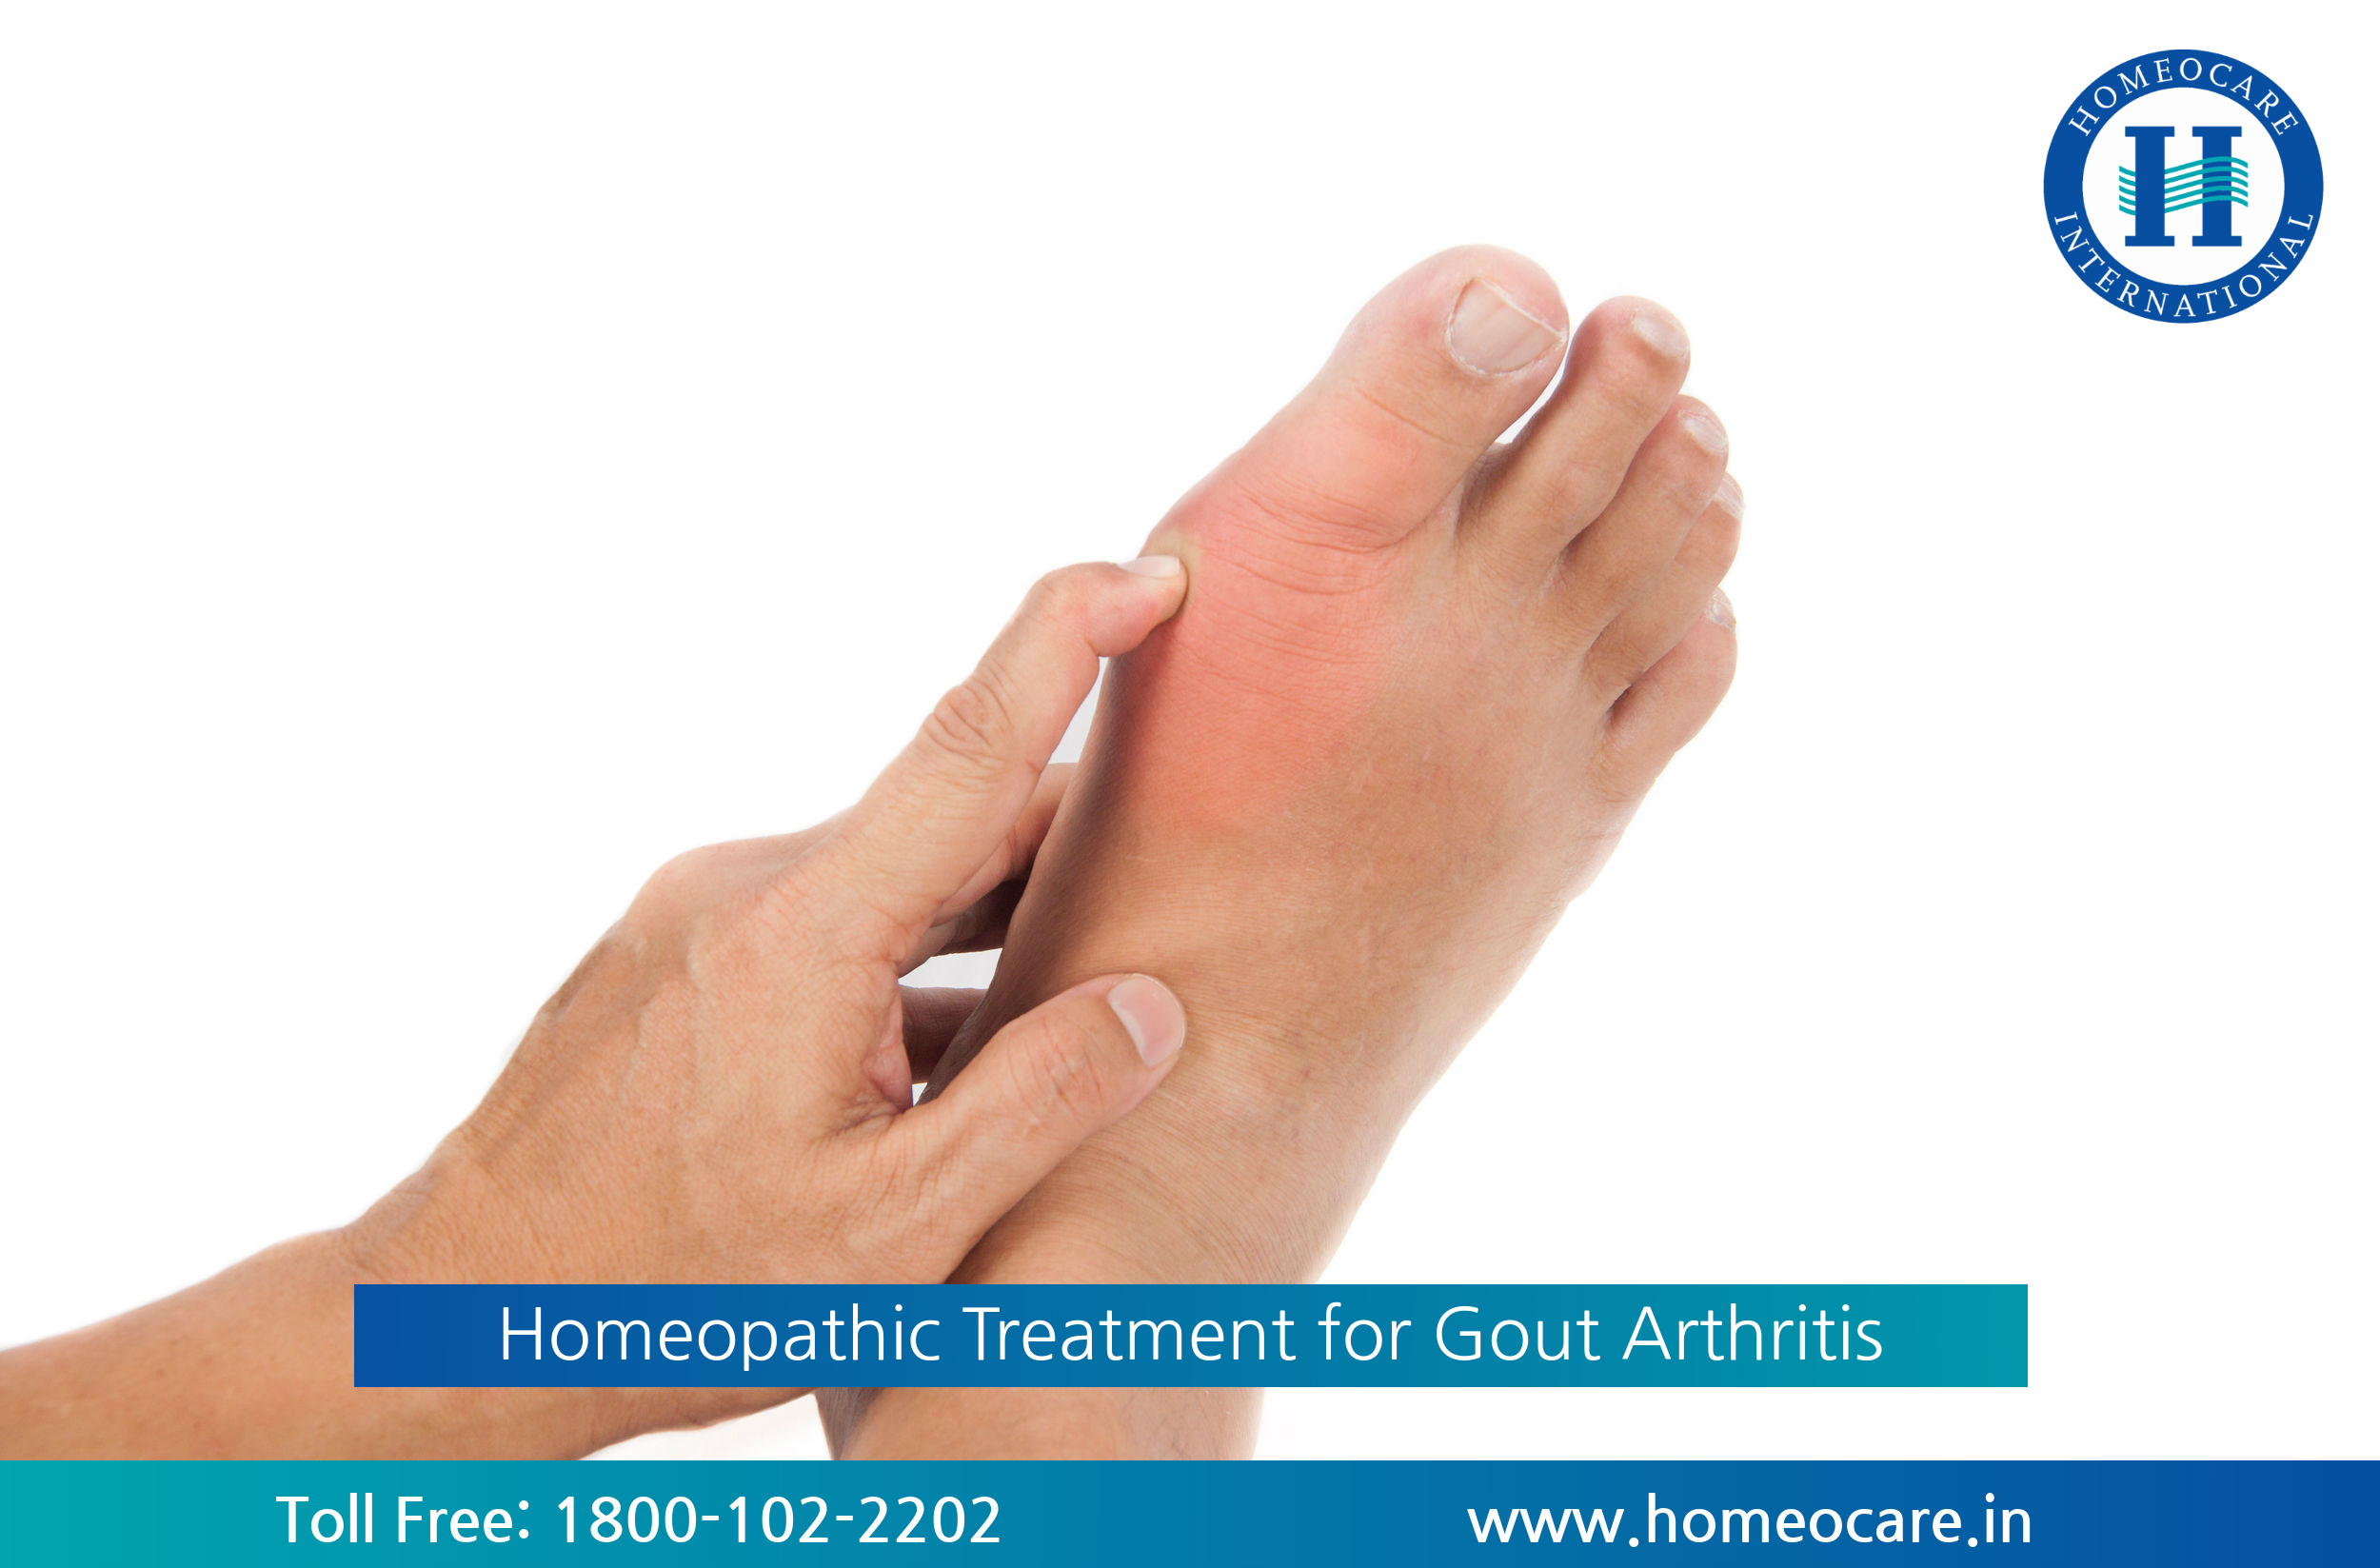 Homeopathy Treatment for Gout Arthritis